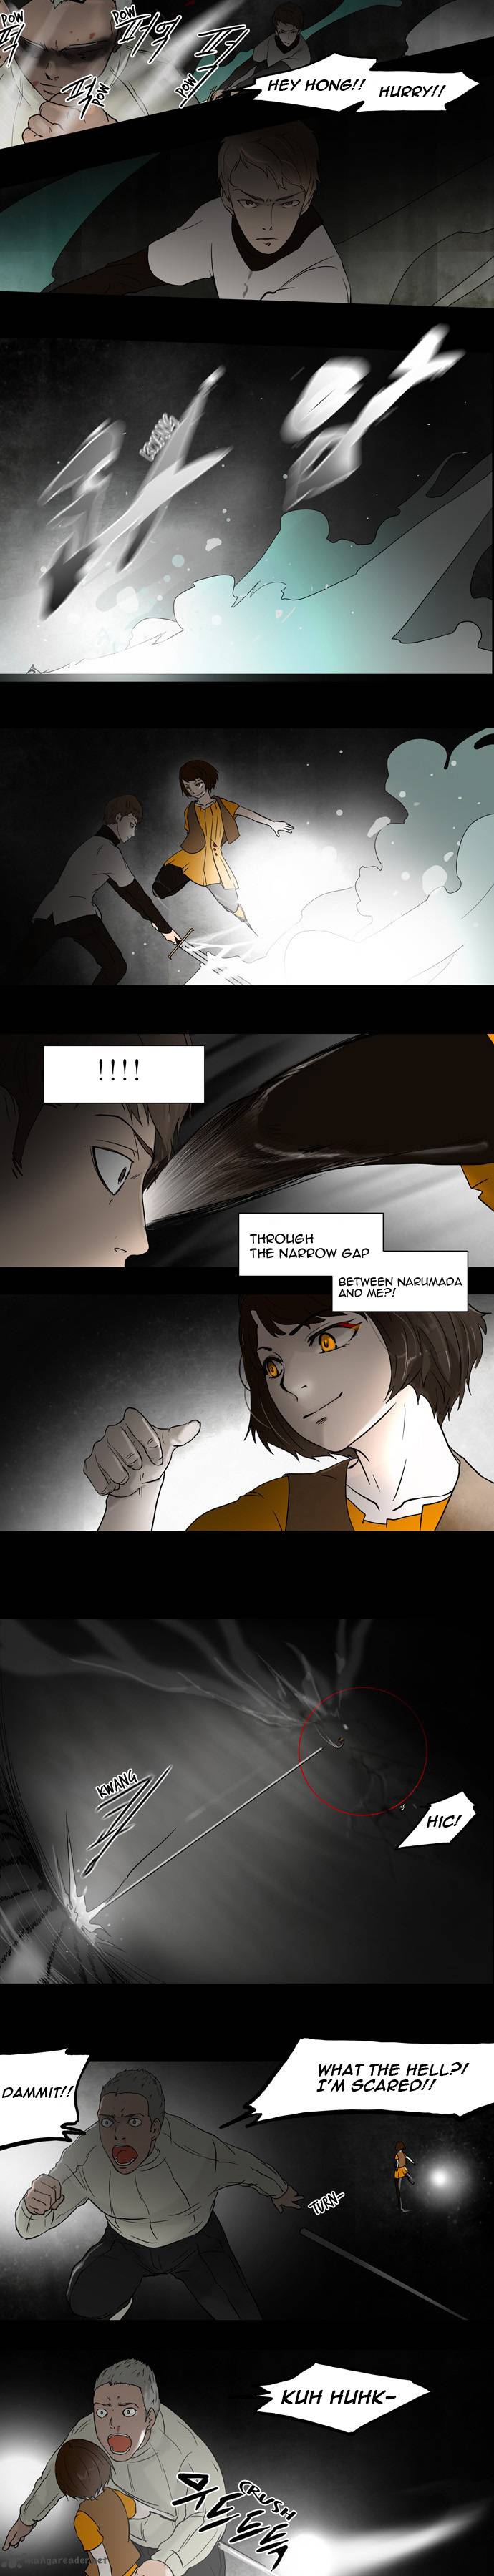 Tower Of God 49 3